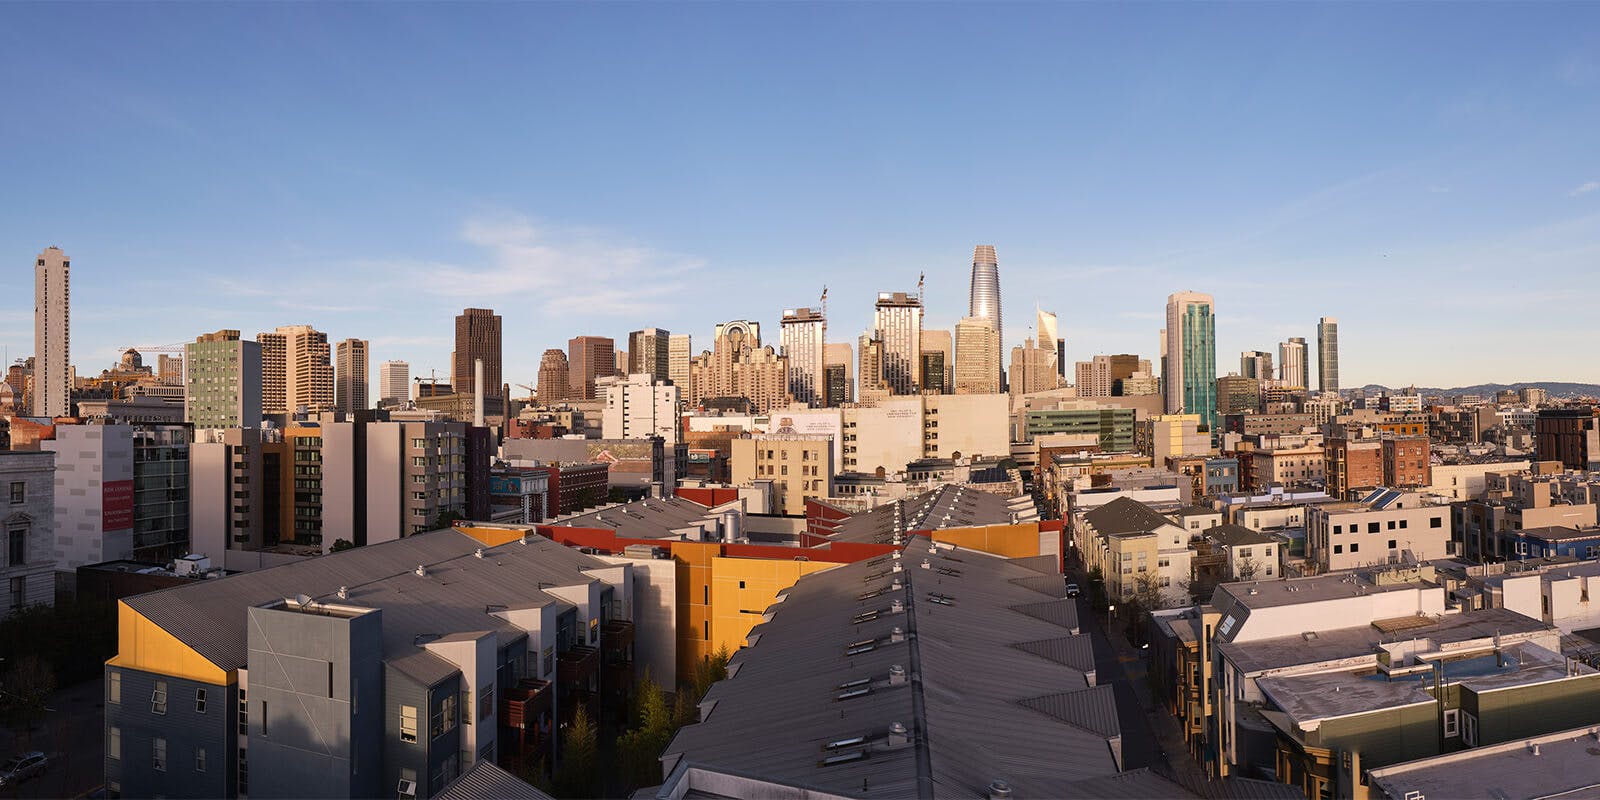 OneElevenSF has lovely rooftop views of the city skyline that can be enjoyed on comfortable lounges with delicious barbecued meals. 